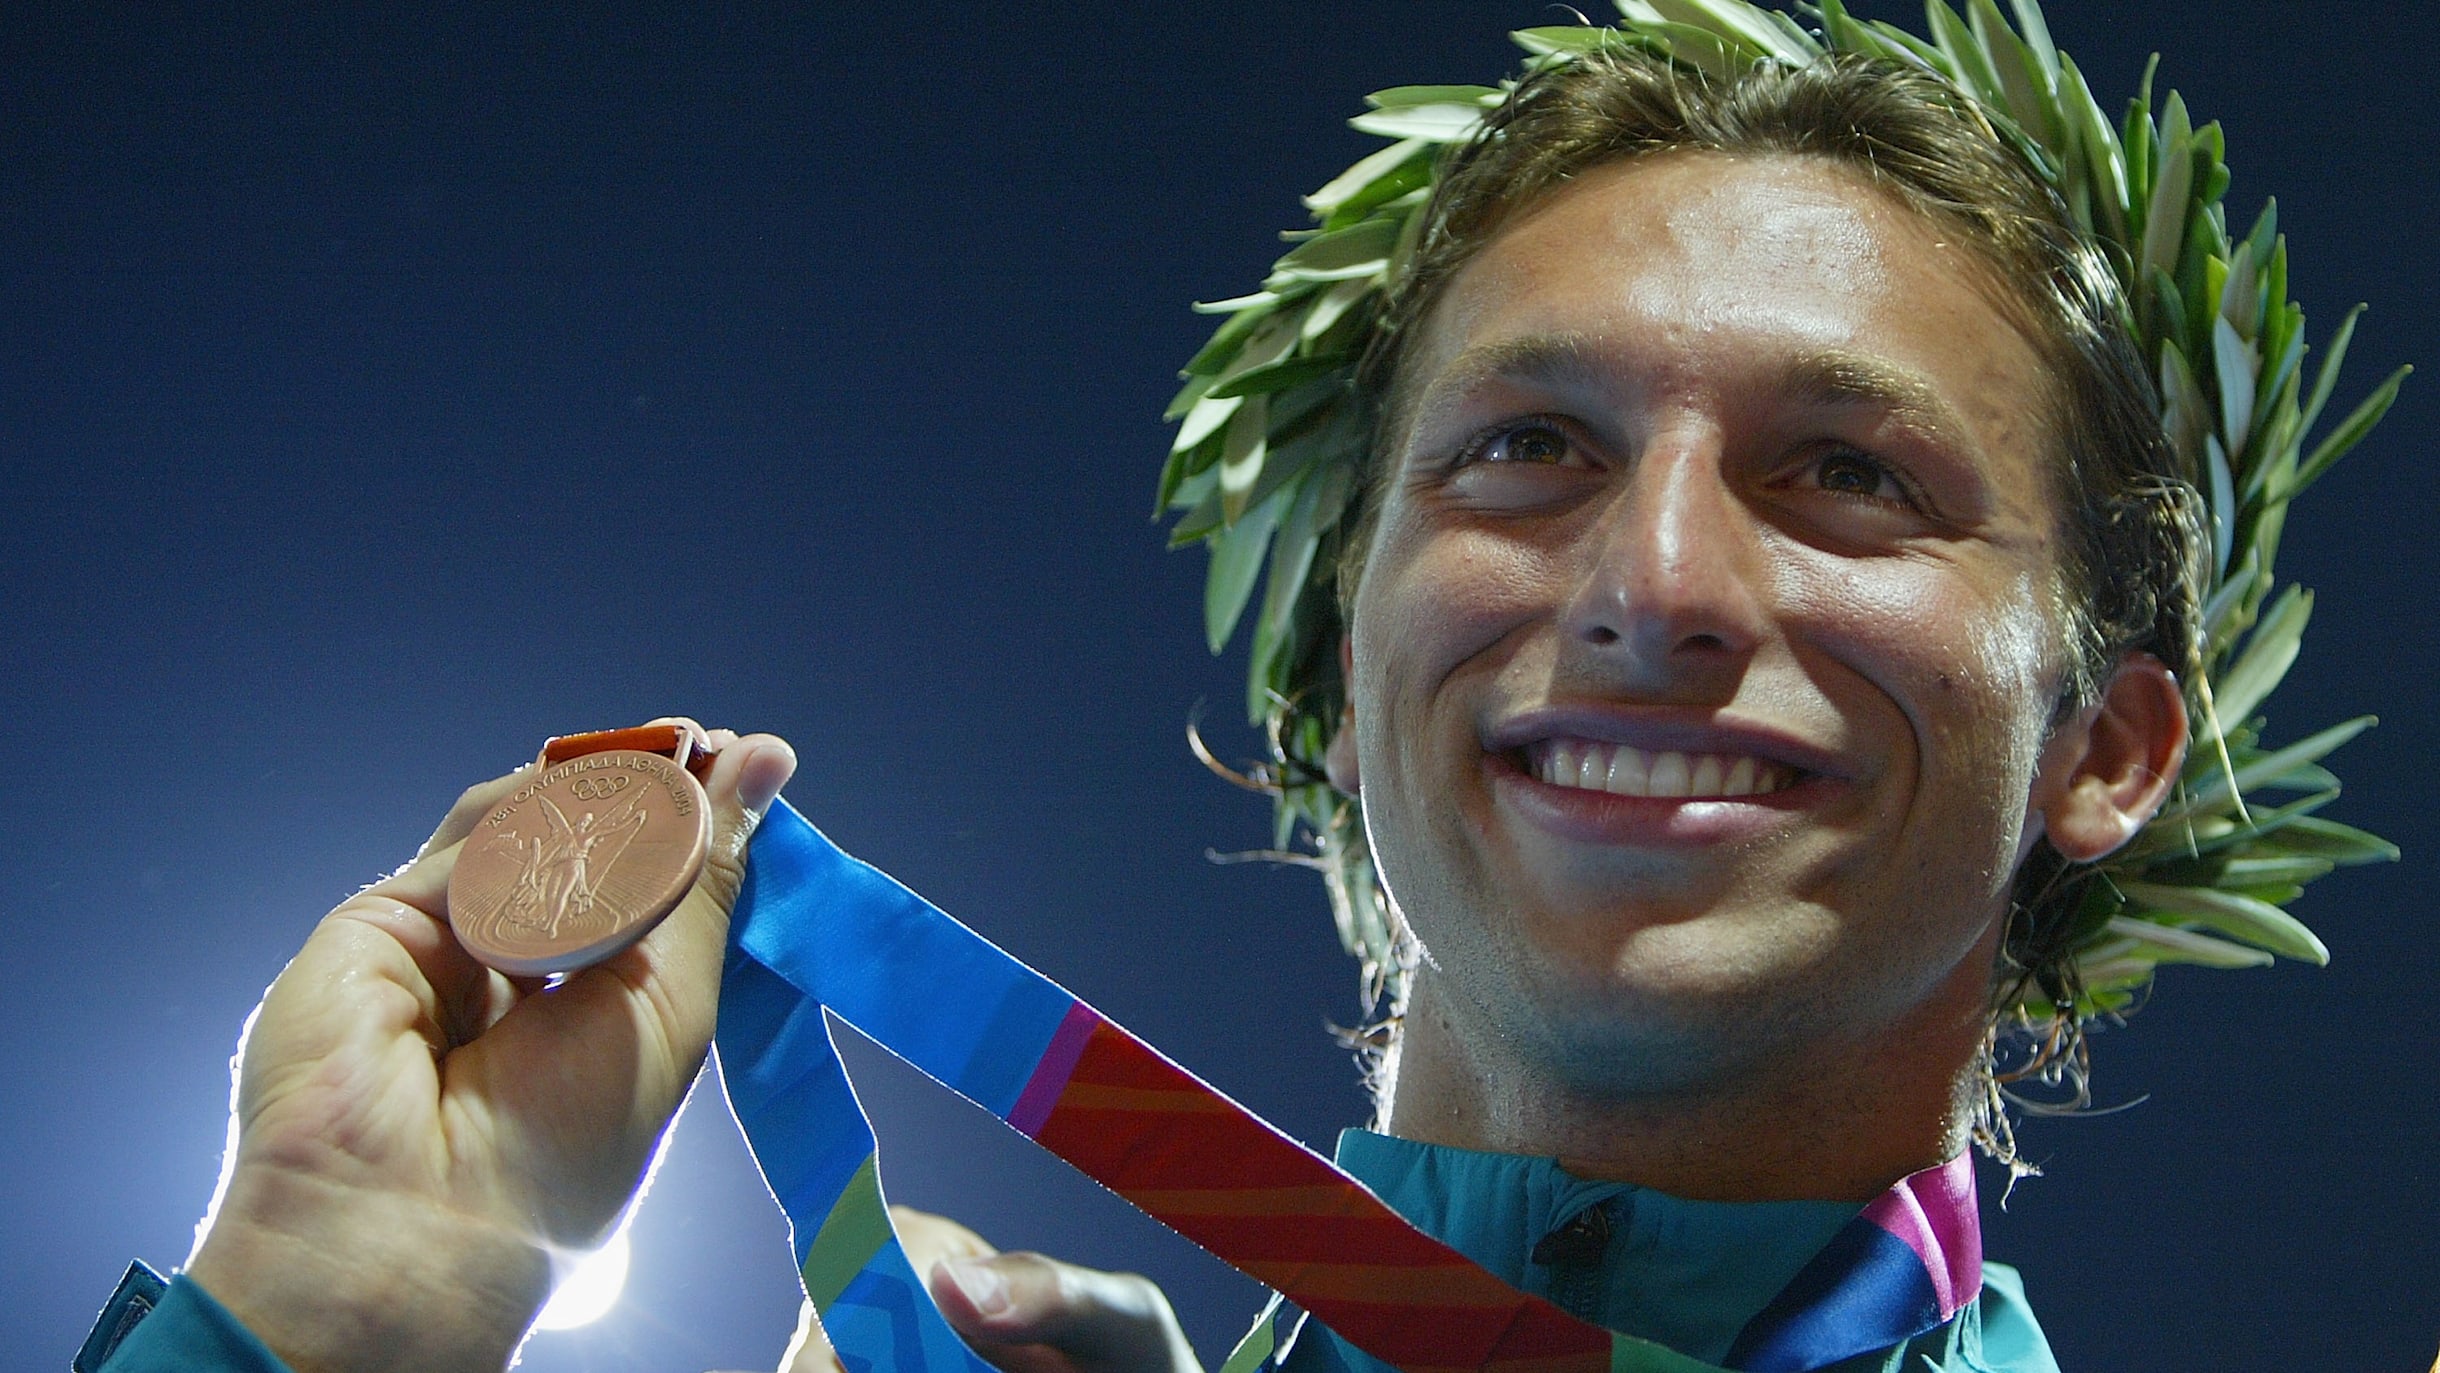 Saniyamirja Xxx Video - Exclusive Q&A: Ian Thorpe on Sydney 2000, coming out, and Tokyo predictions